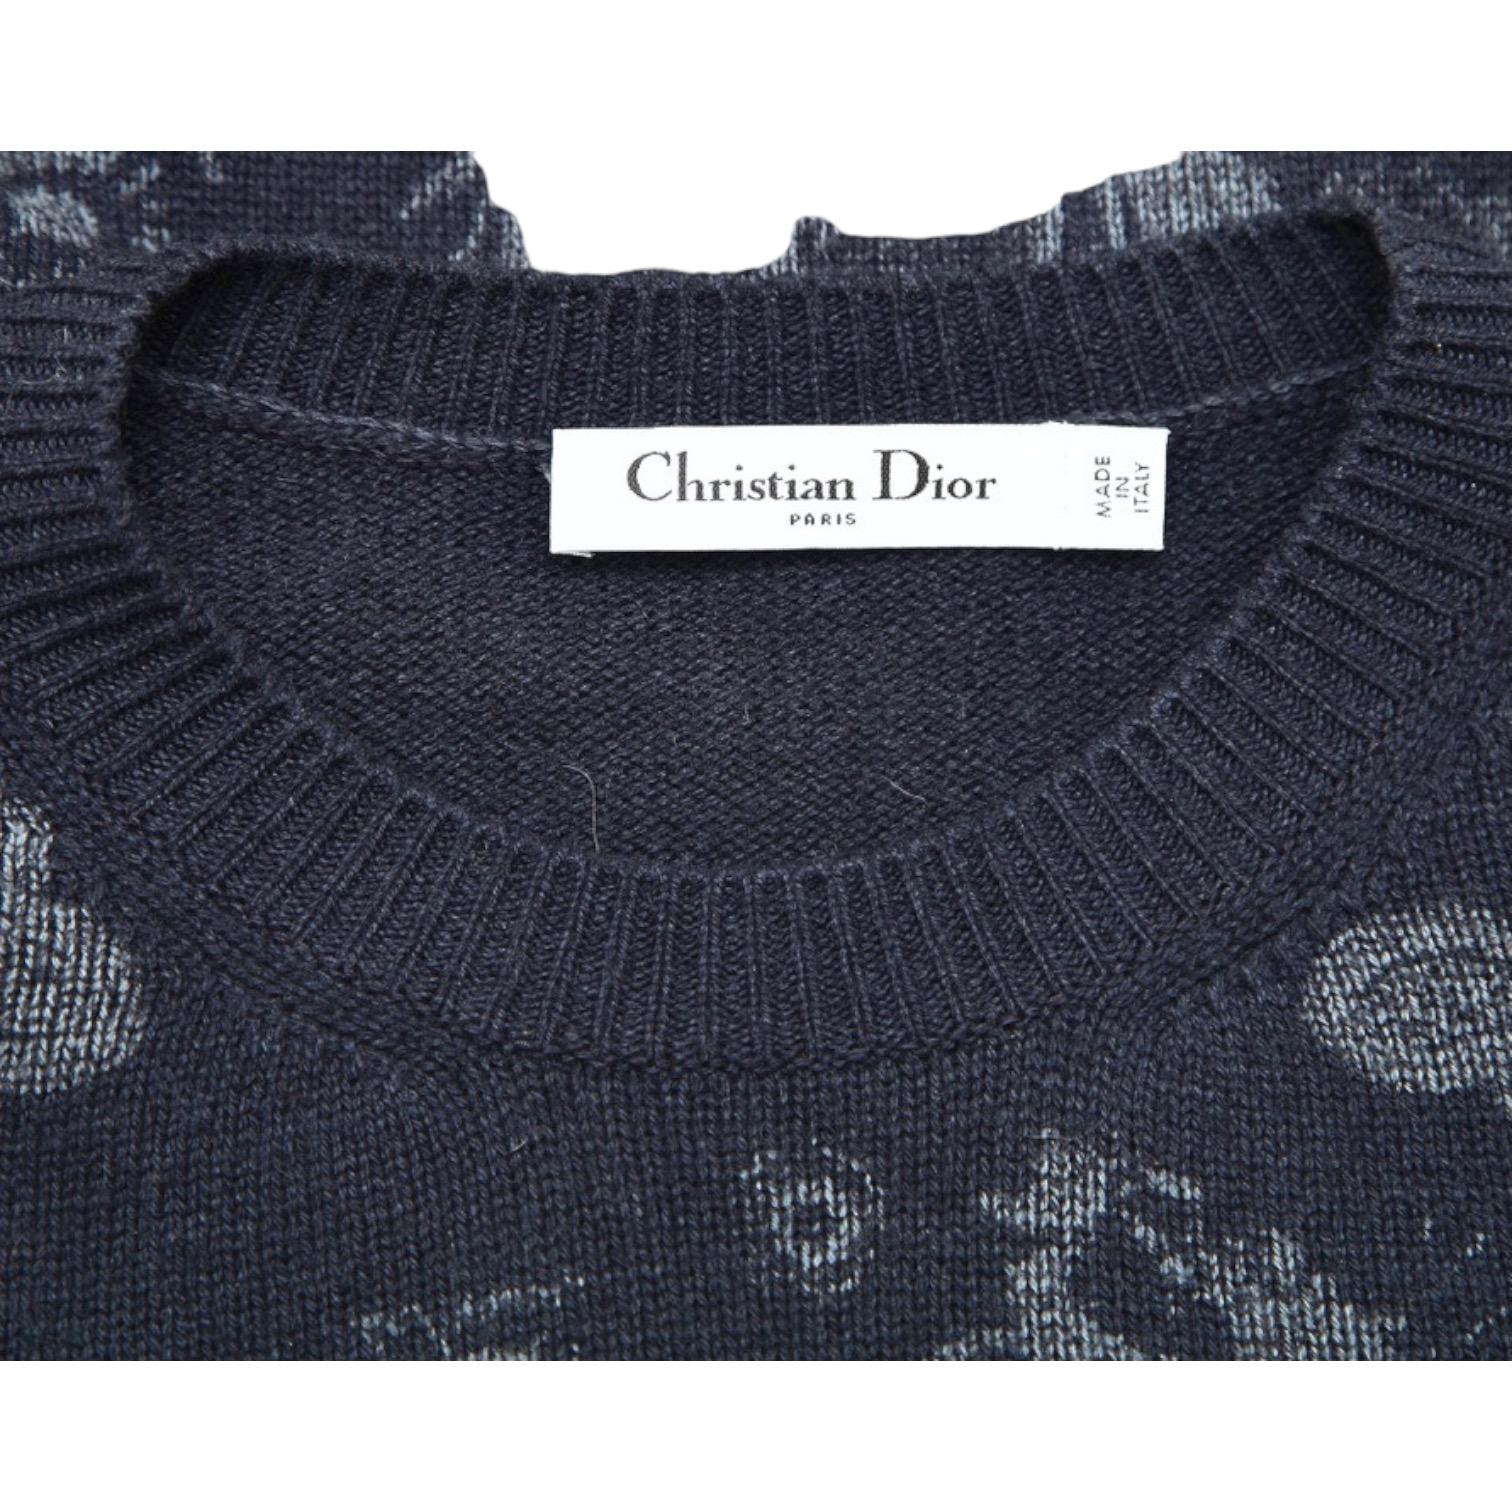 CHRISTIAN DIOR Sweater Top Blue Long Sleeve Crew Neck Print Cashmere Sz 36 2021 For Sale 2